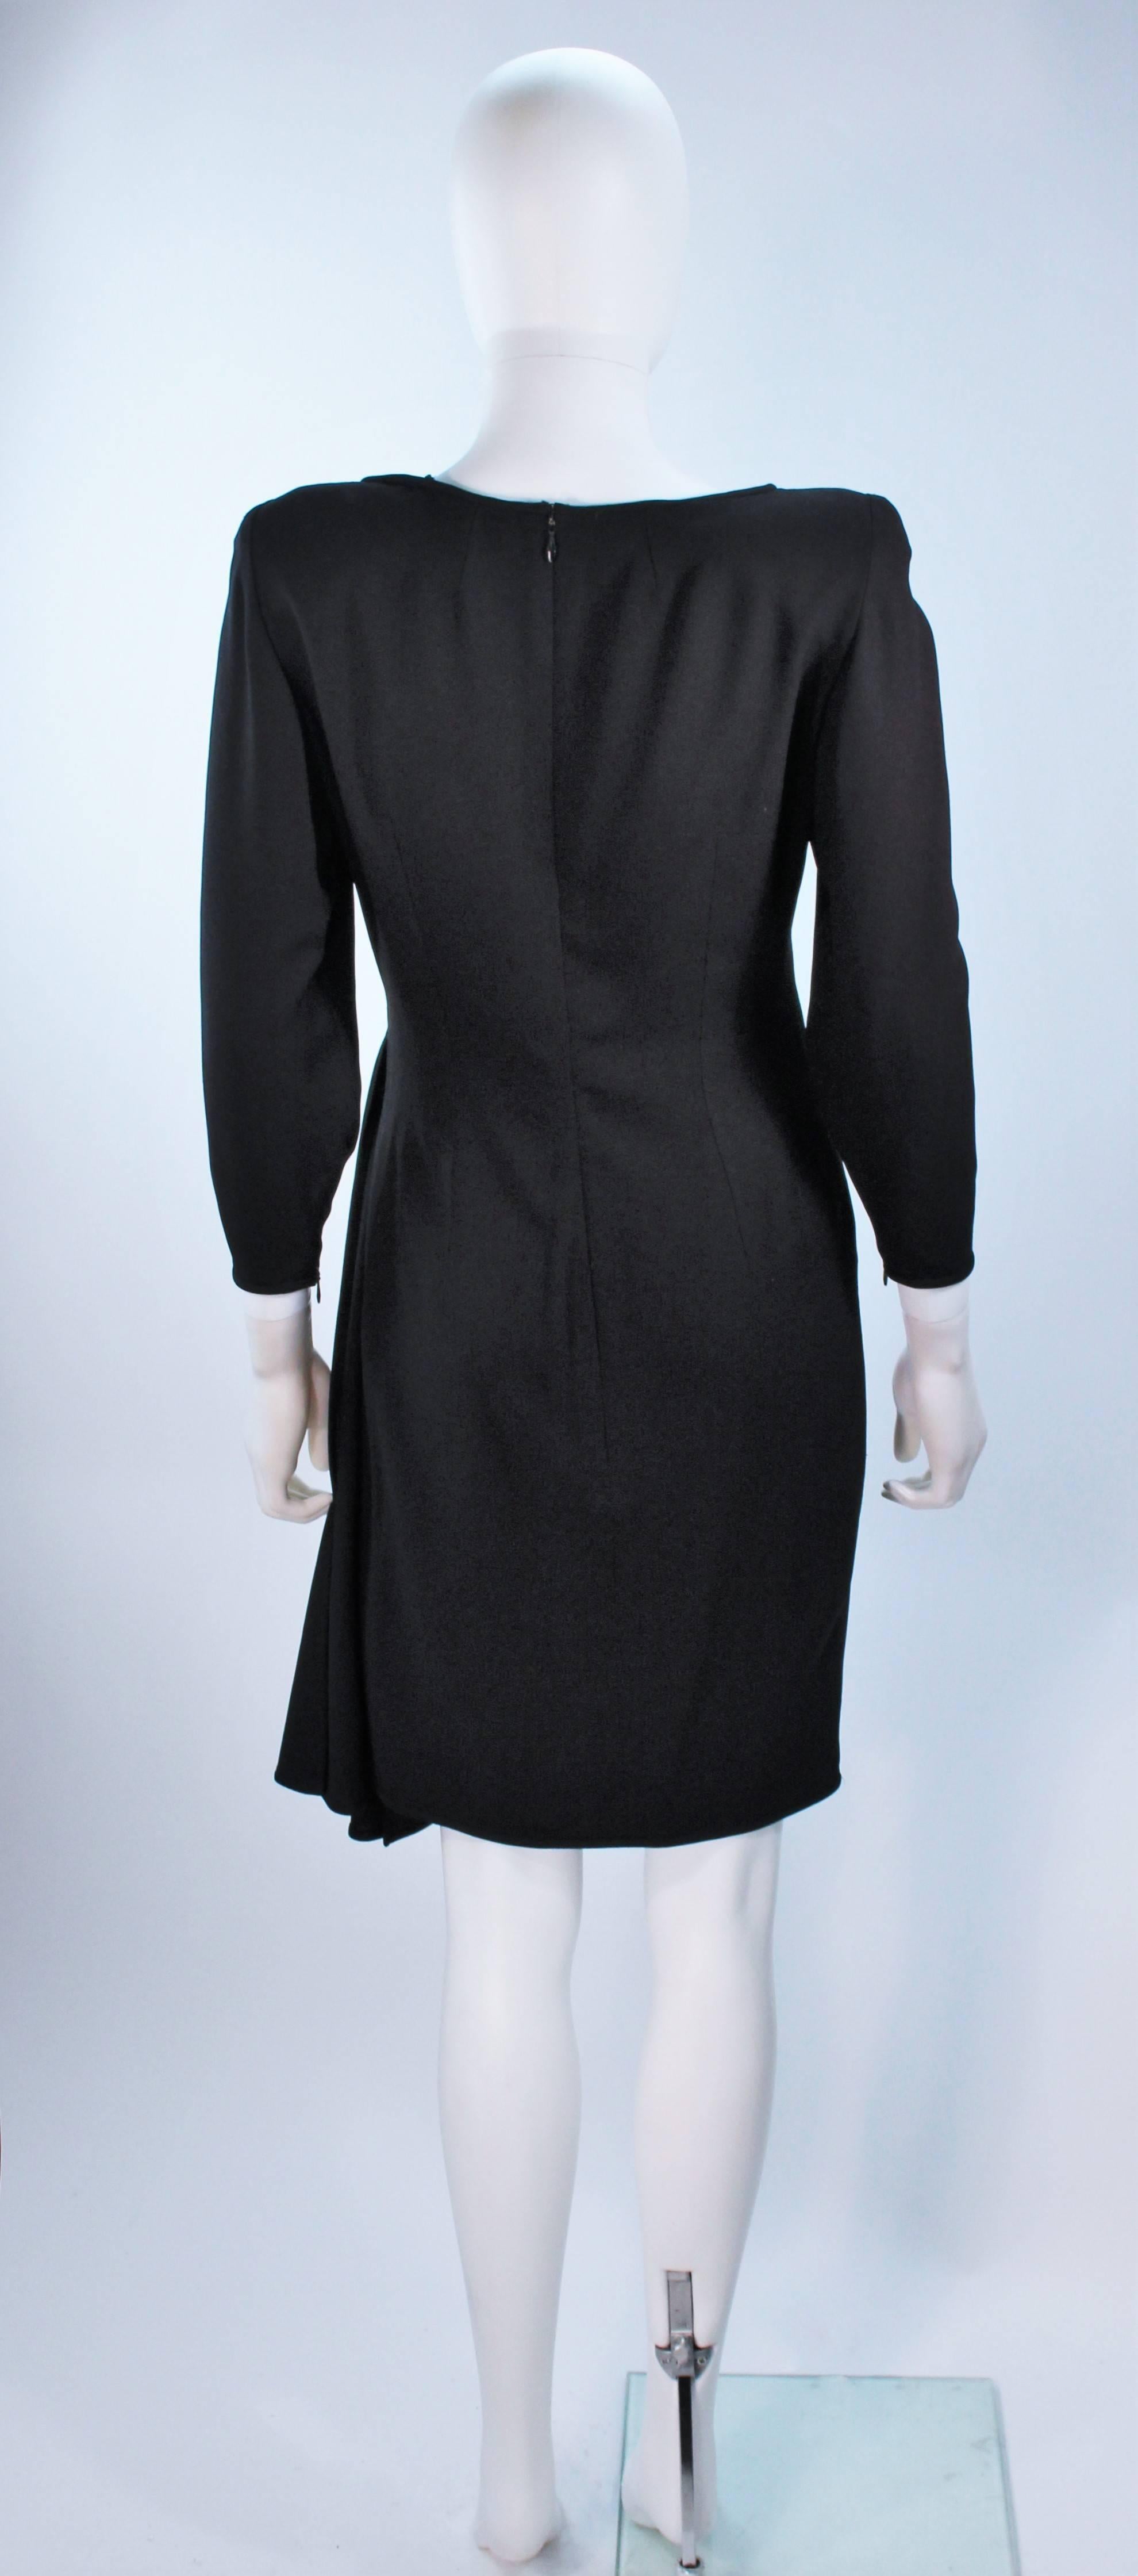 VALENTINO 1980'S Black Draped Cocktail Dress Size 6-8 For Sale 4